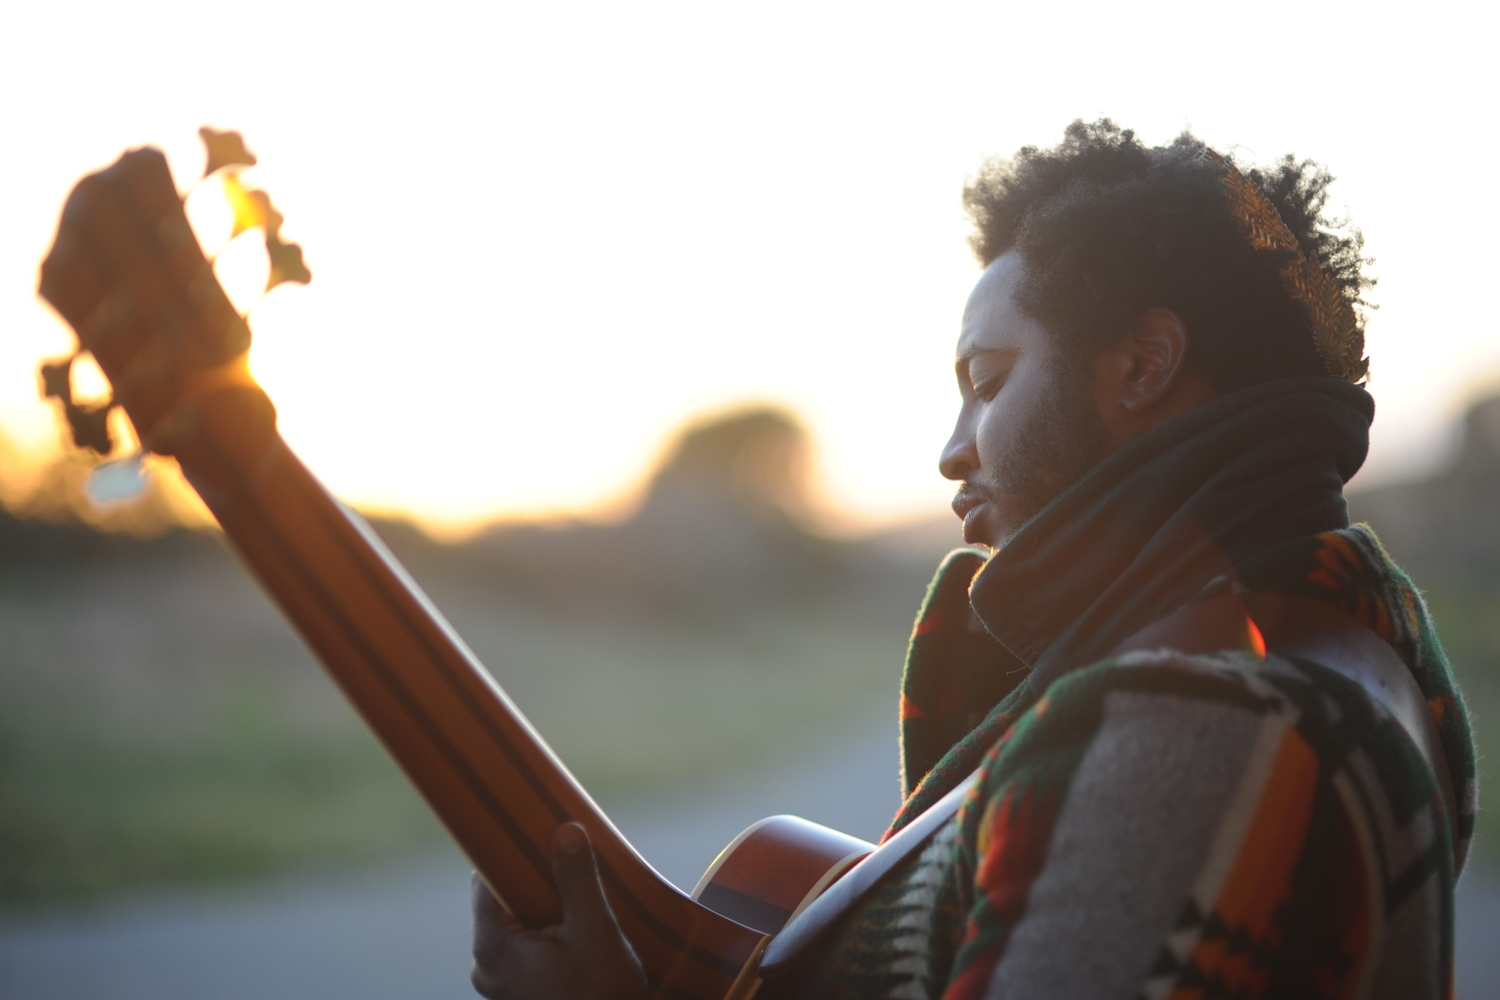 Thundercat's new album 'Drunk' will feature Kendrick Lamar and Flying Lotus